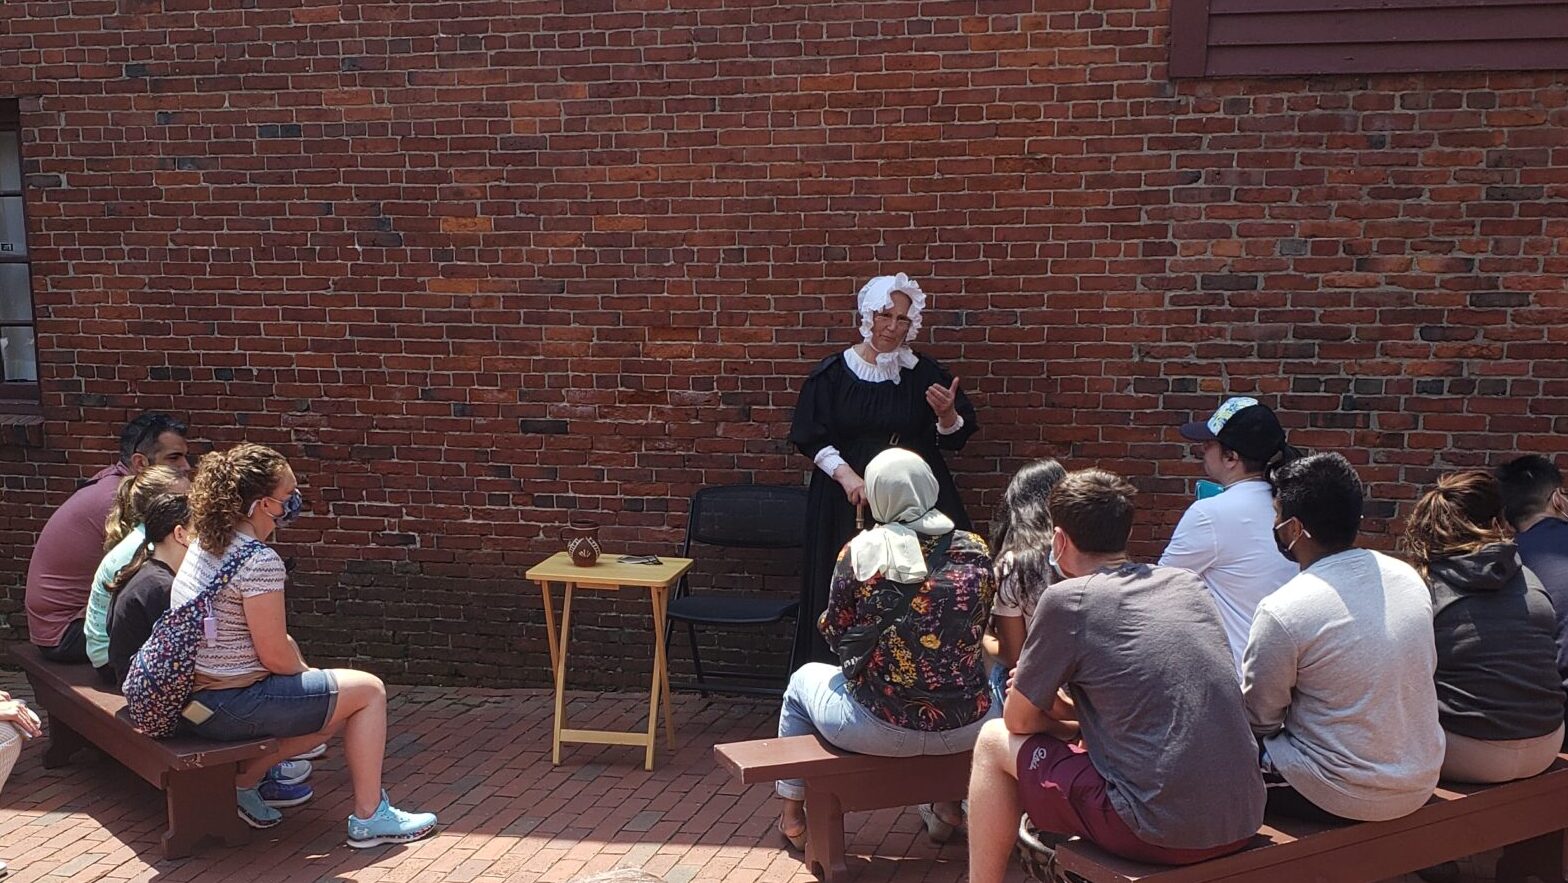 woman in colonial clothes speaking in front of people in rows on benches